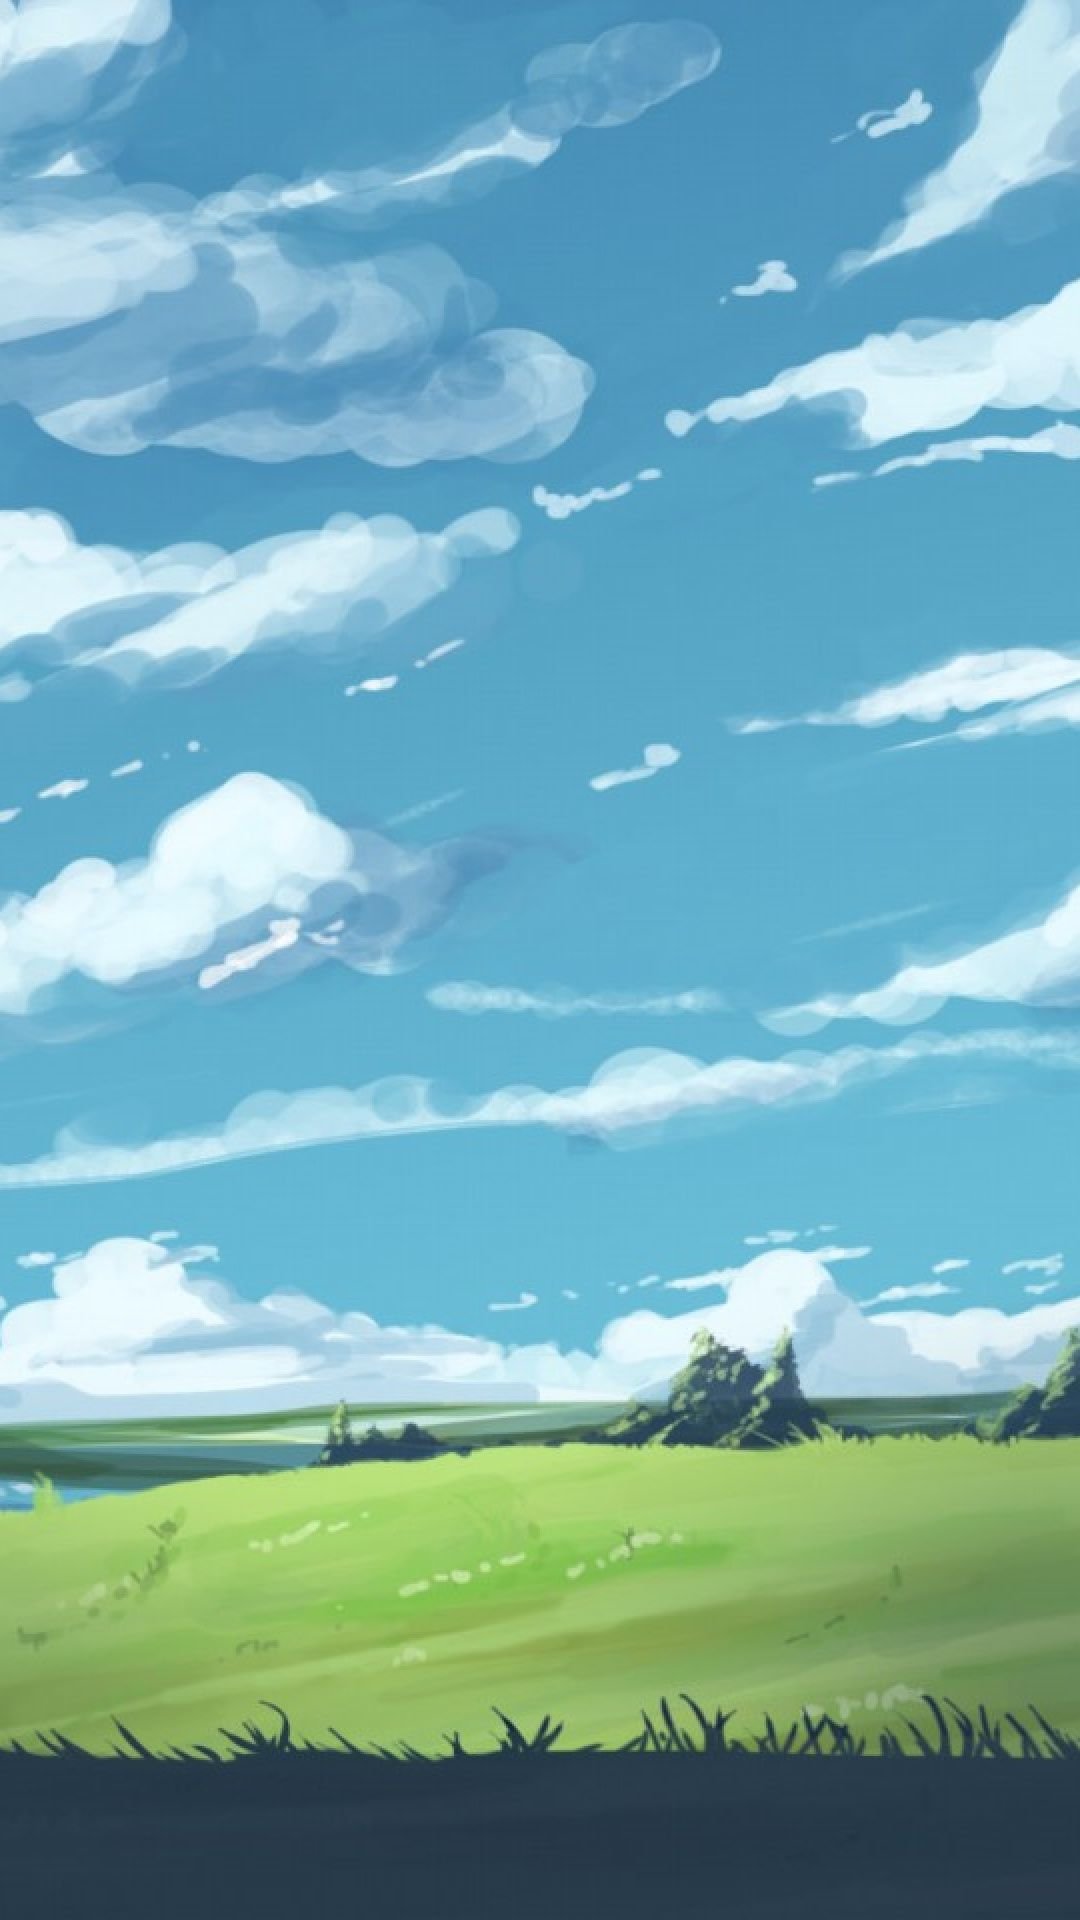 Wallpaper Anime Landscape Anime Art Theatrical Scenery Landscape  Background  Download Free Image